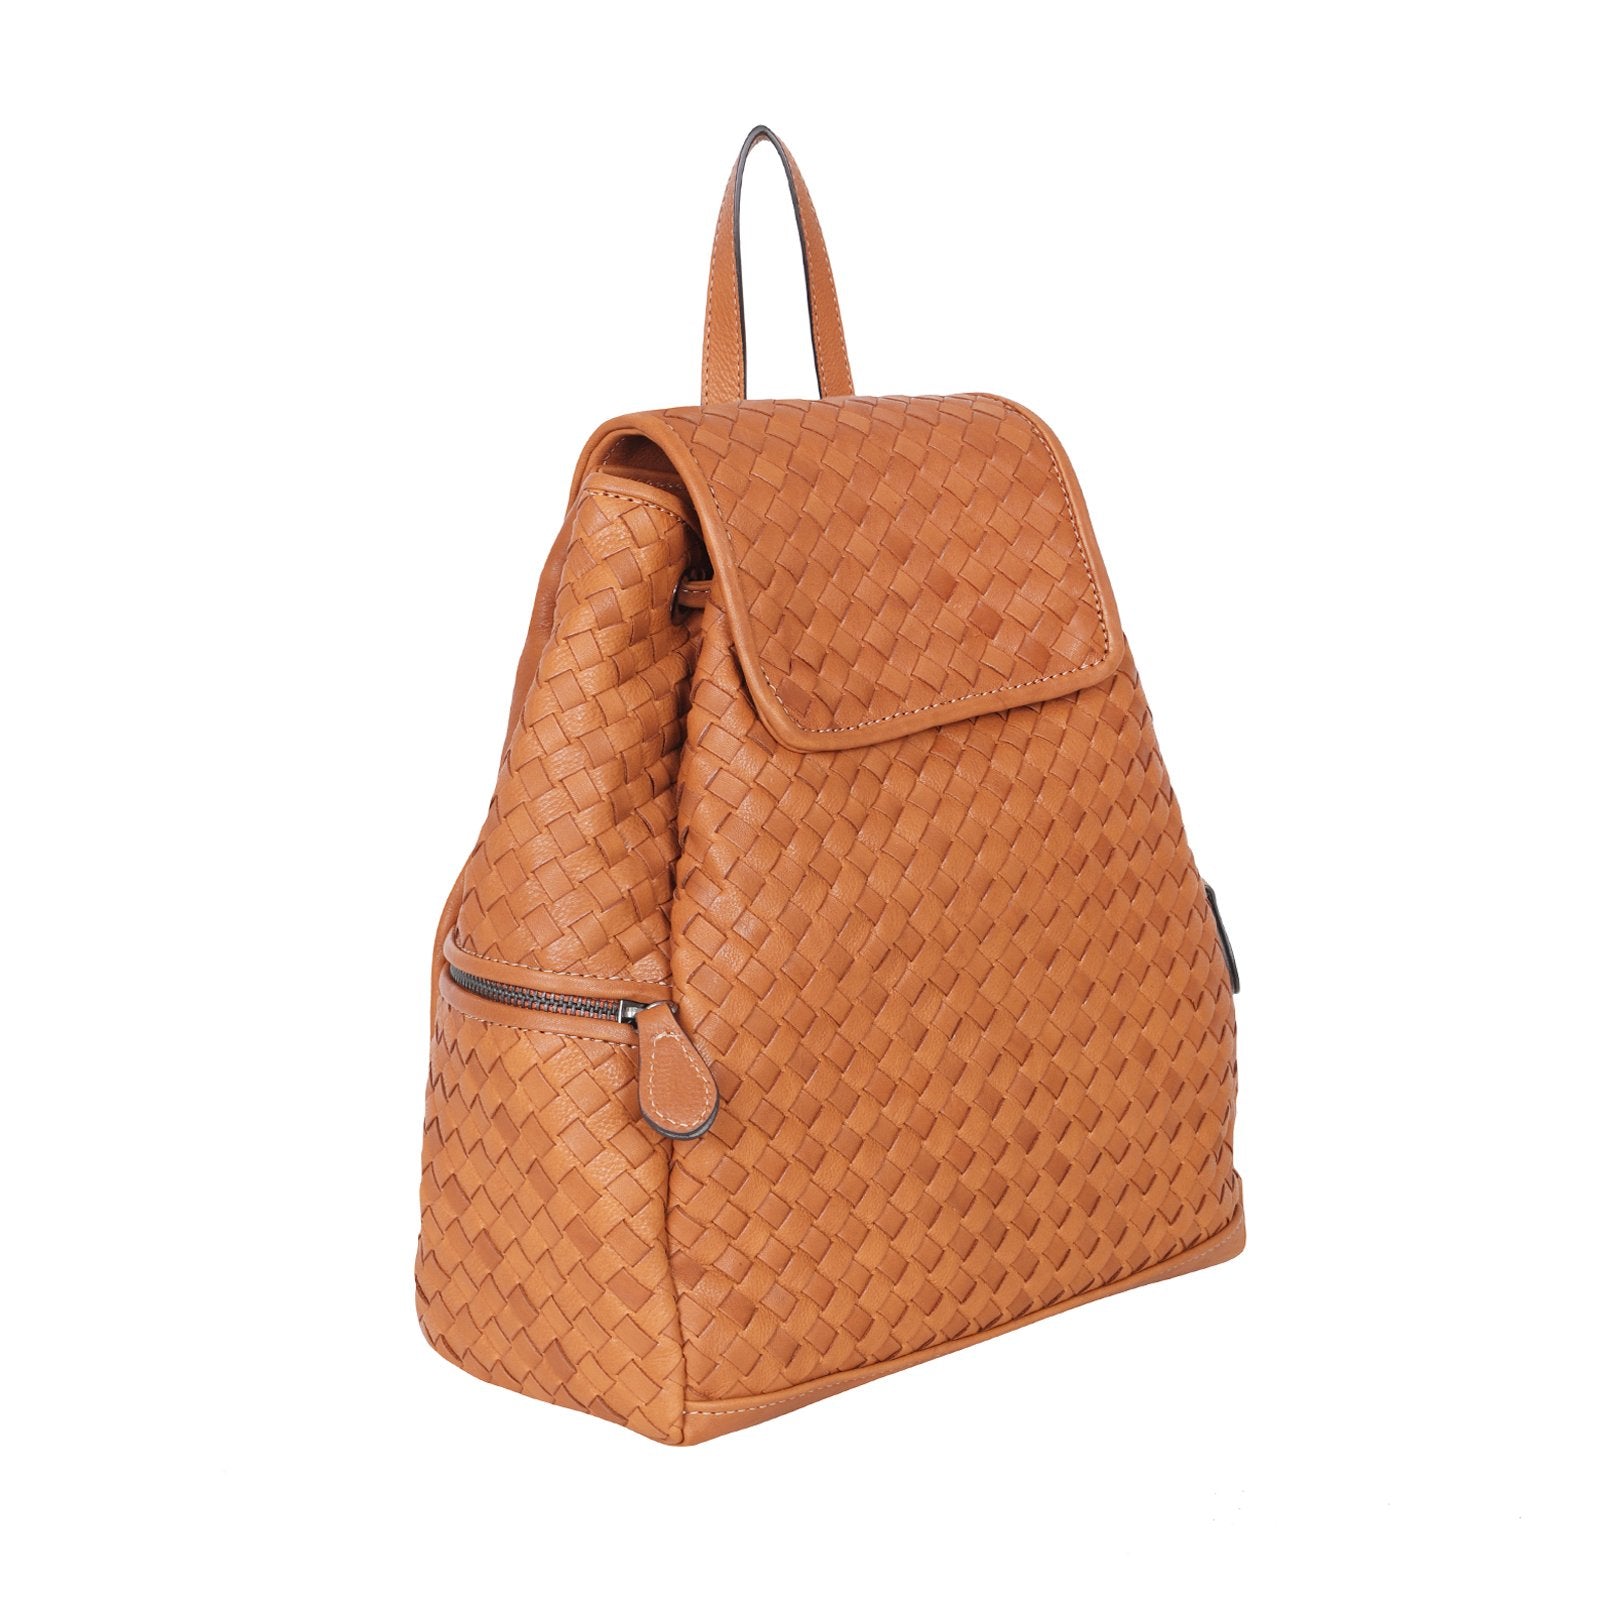 The Woven Backpack, Handmade Woven Leather Backpack - MILANER